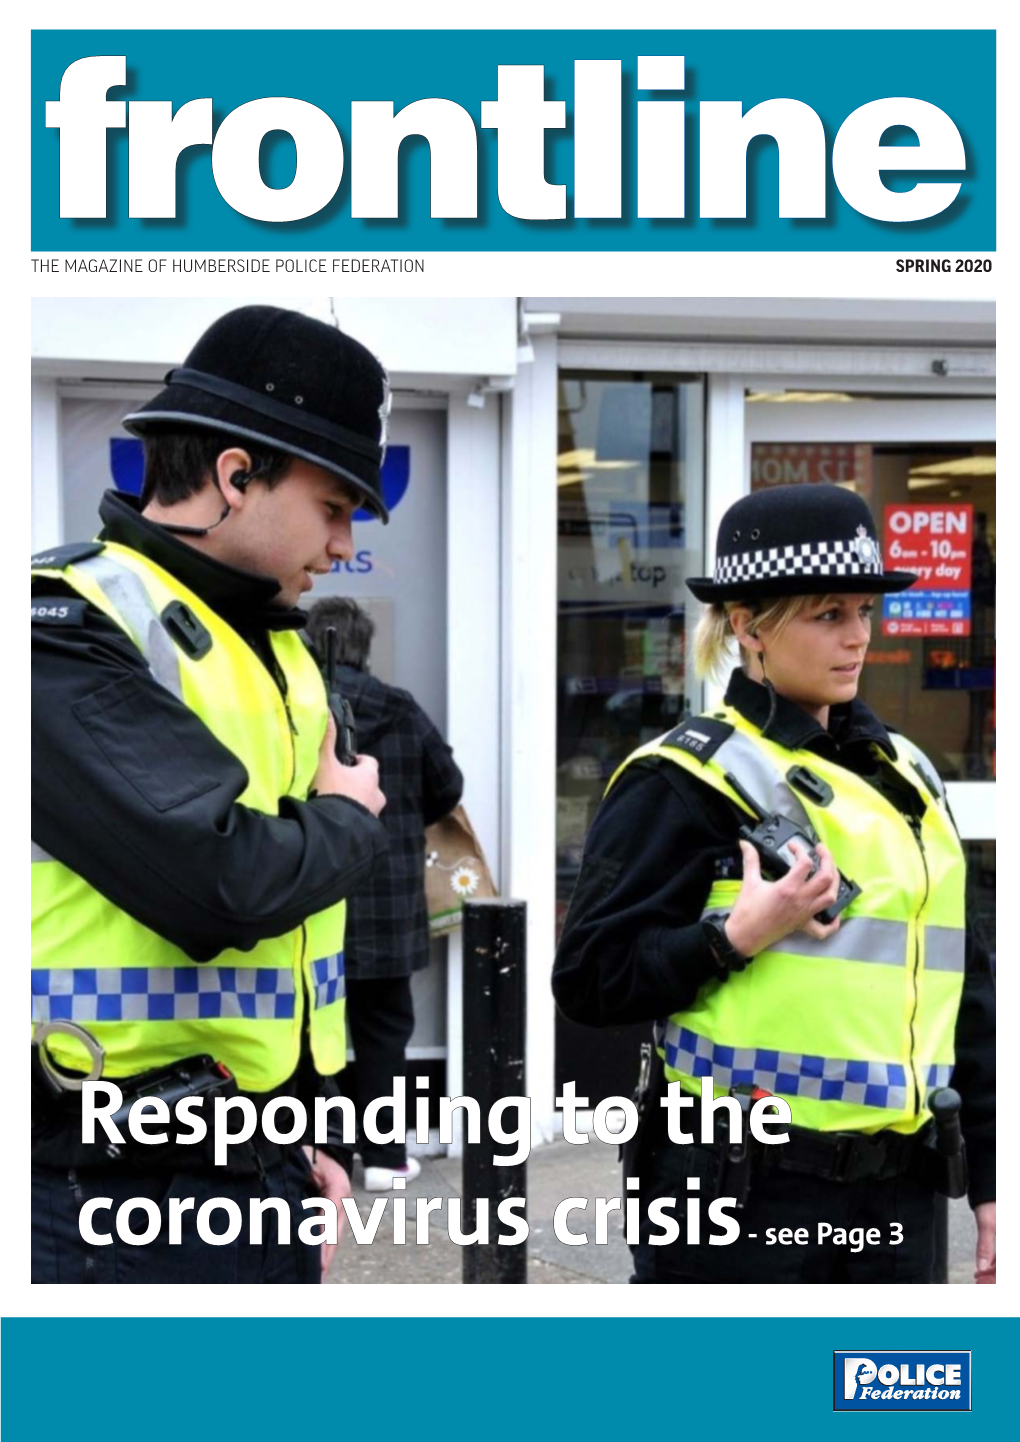 Spring 2020 1 the MAGAZINE of HUMBERSIDE POLICE FEDERATION SPRING 2020